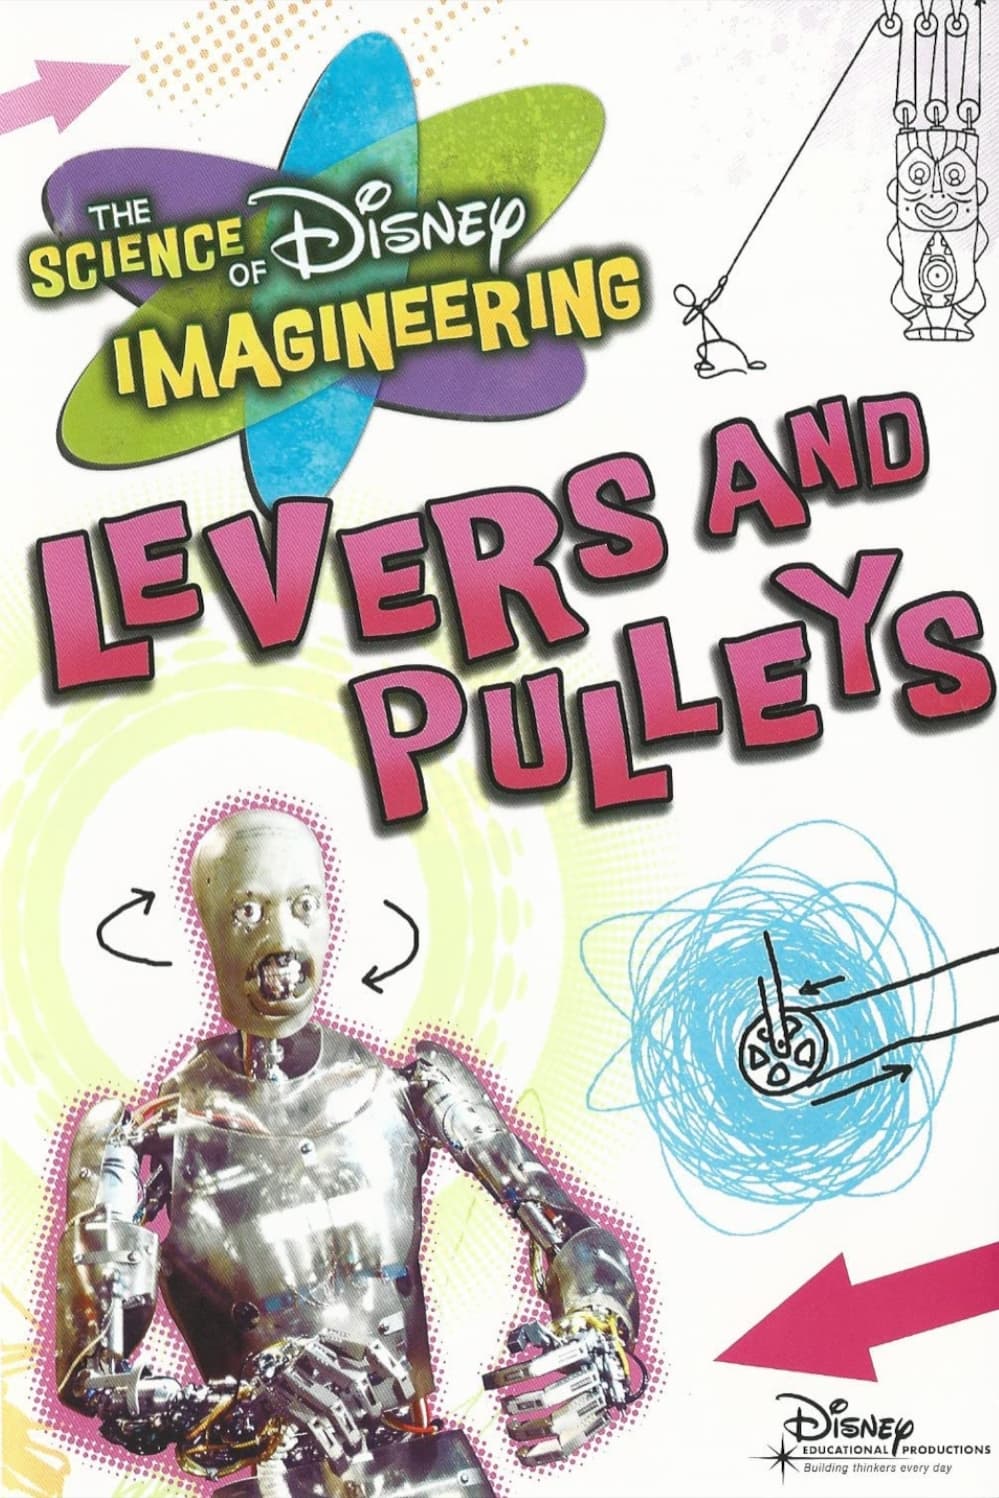 The Science of Disney Imagineering: Levers and Pulleys